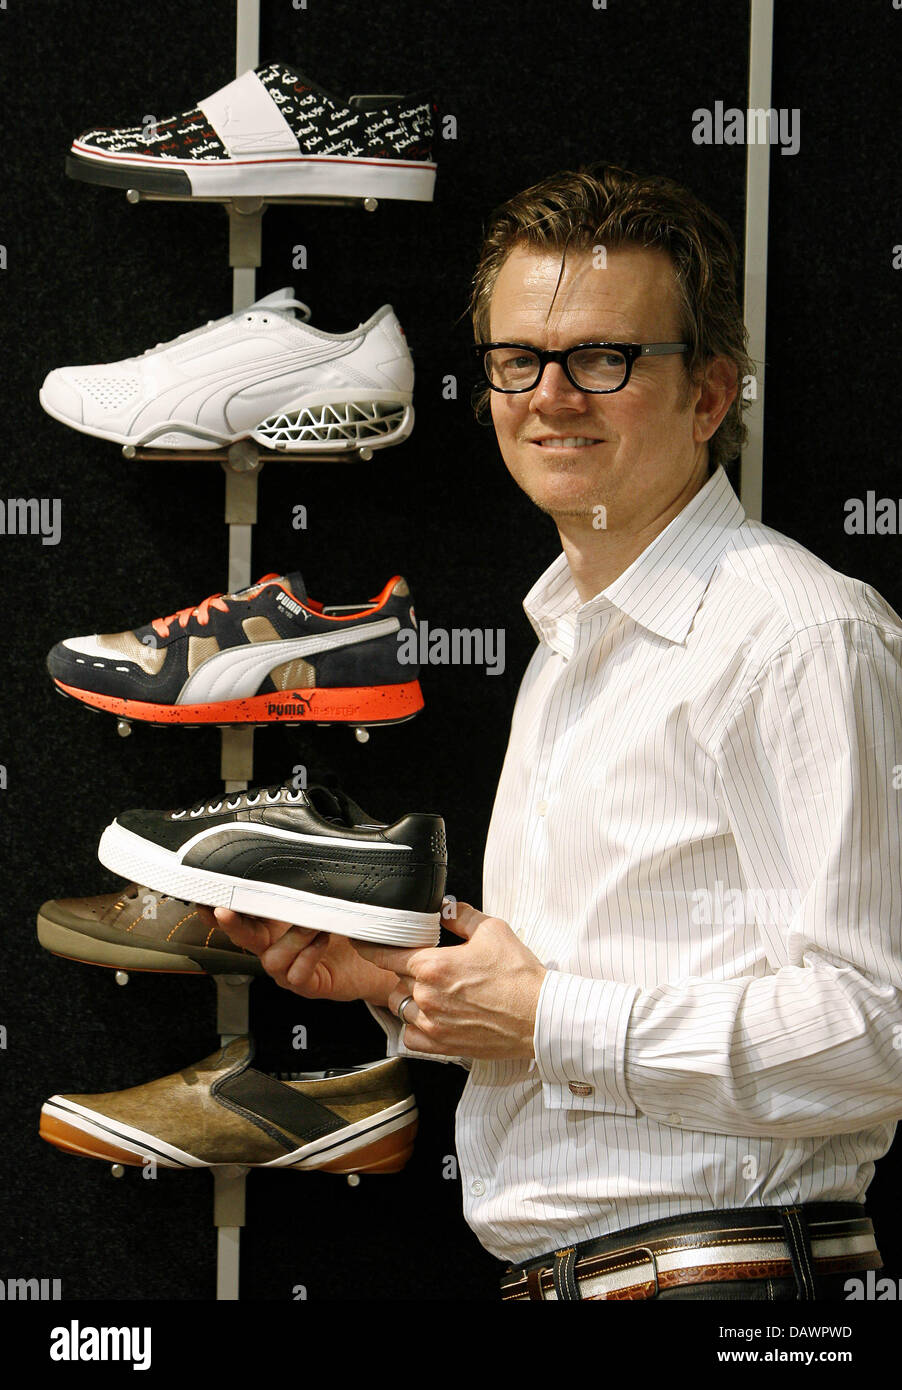 Puma senior designer Gavin Ivester poses with Puma shoes at the group's  brand centre in Nuremberg, Germany, 22 May 2007. Ivester reduced his  designing hours for he is also Senior VP and